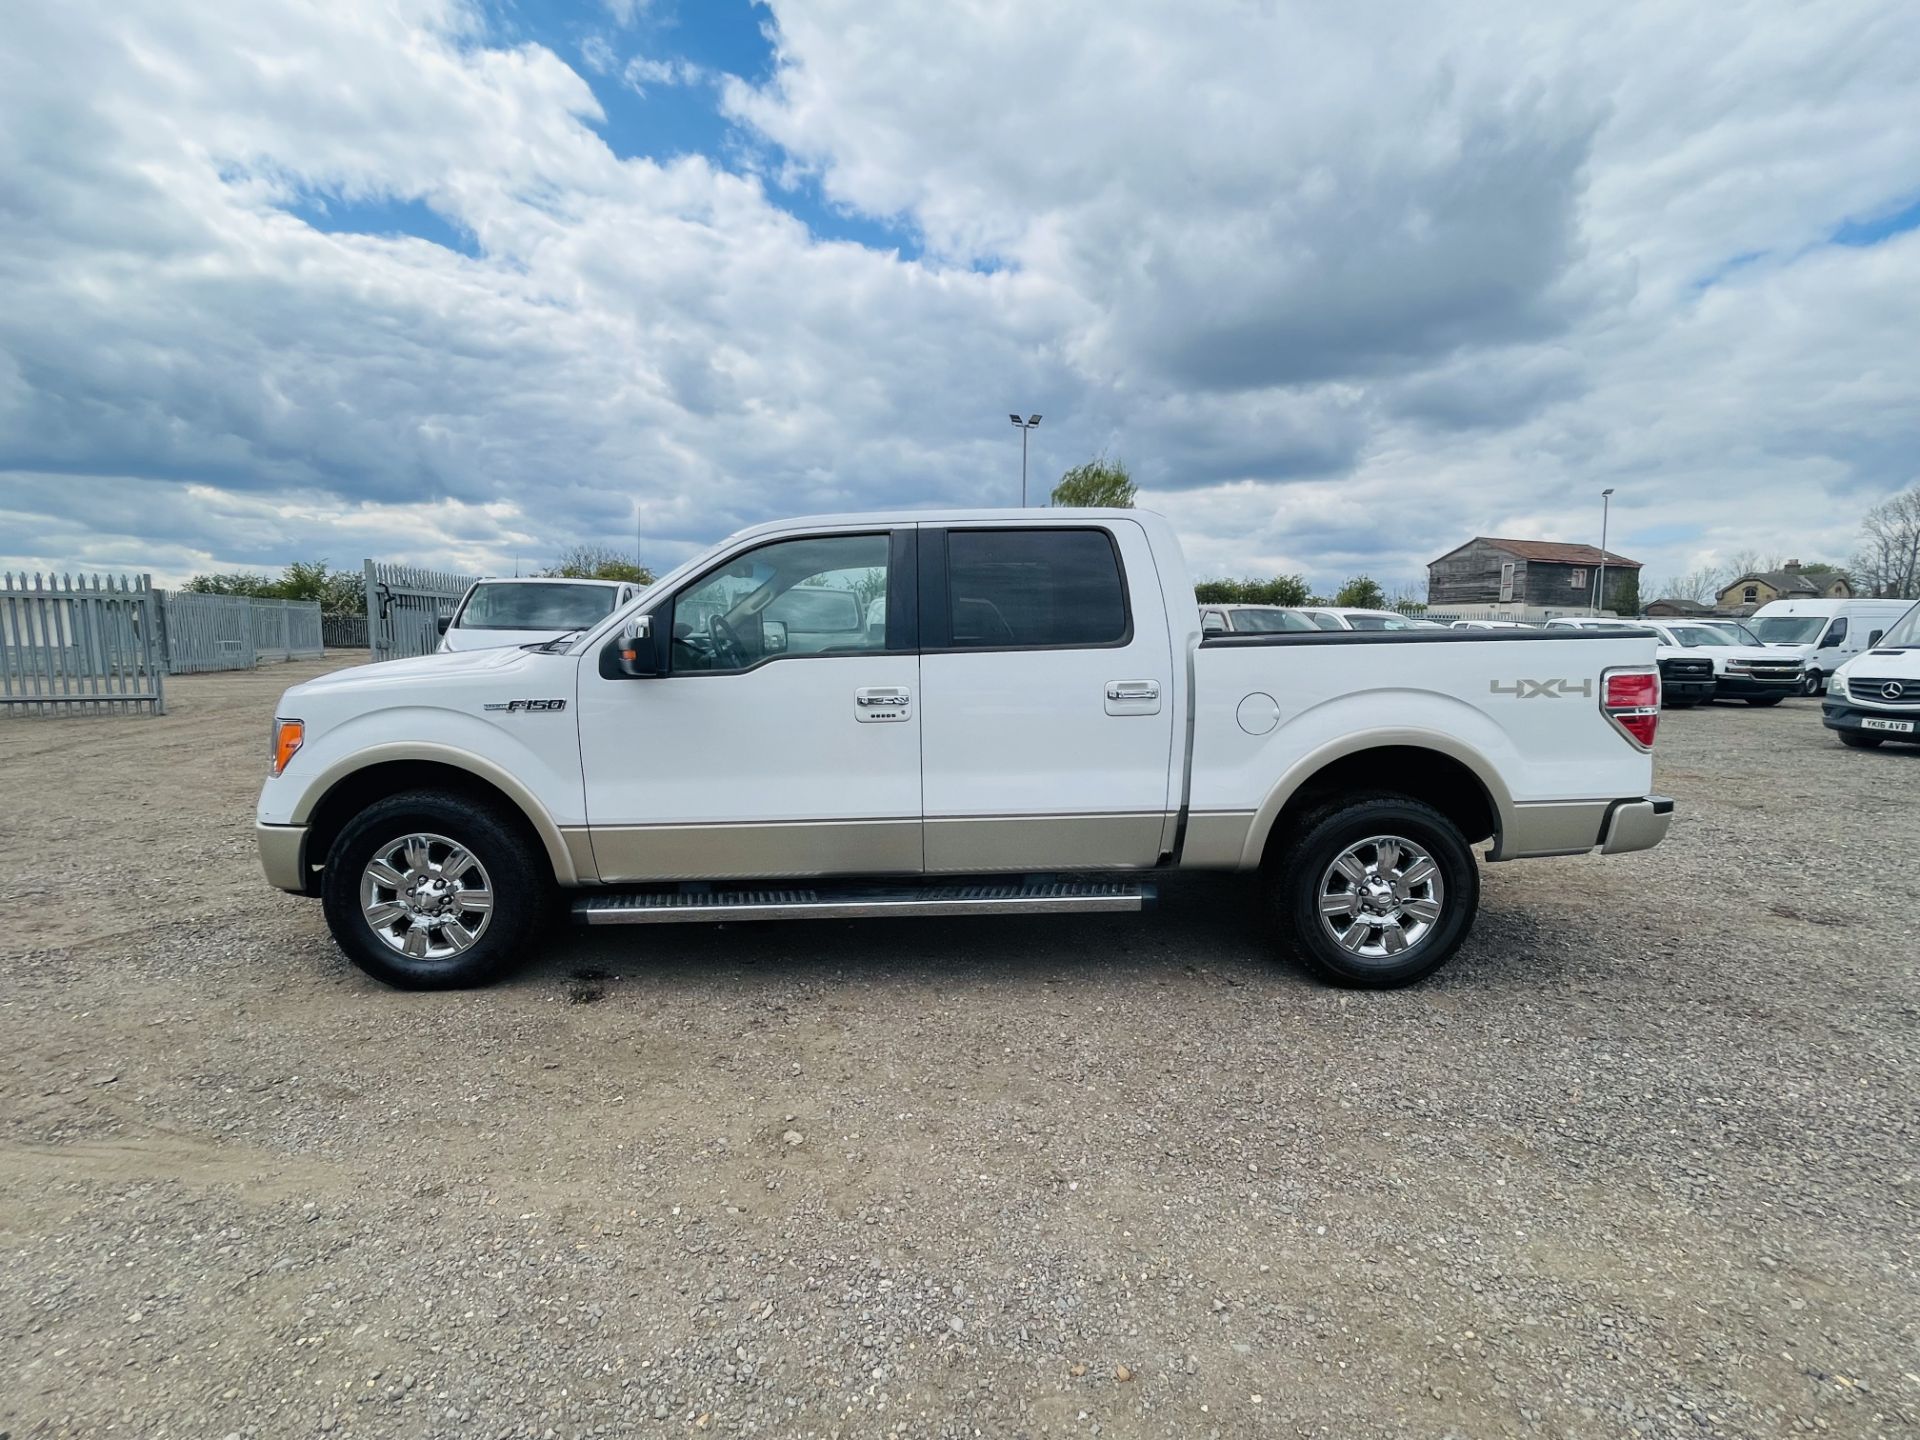 ** ON SALE ** Ford F-150 5.4L V8 Lariat Supercrew 4WD ' 2010 Year' A/C - Full Spec - ULEZ Compliant - Image 7 of 29